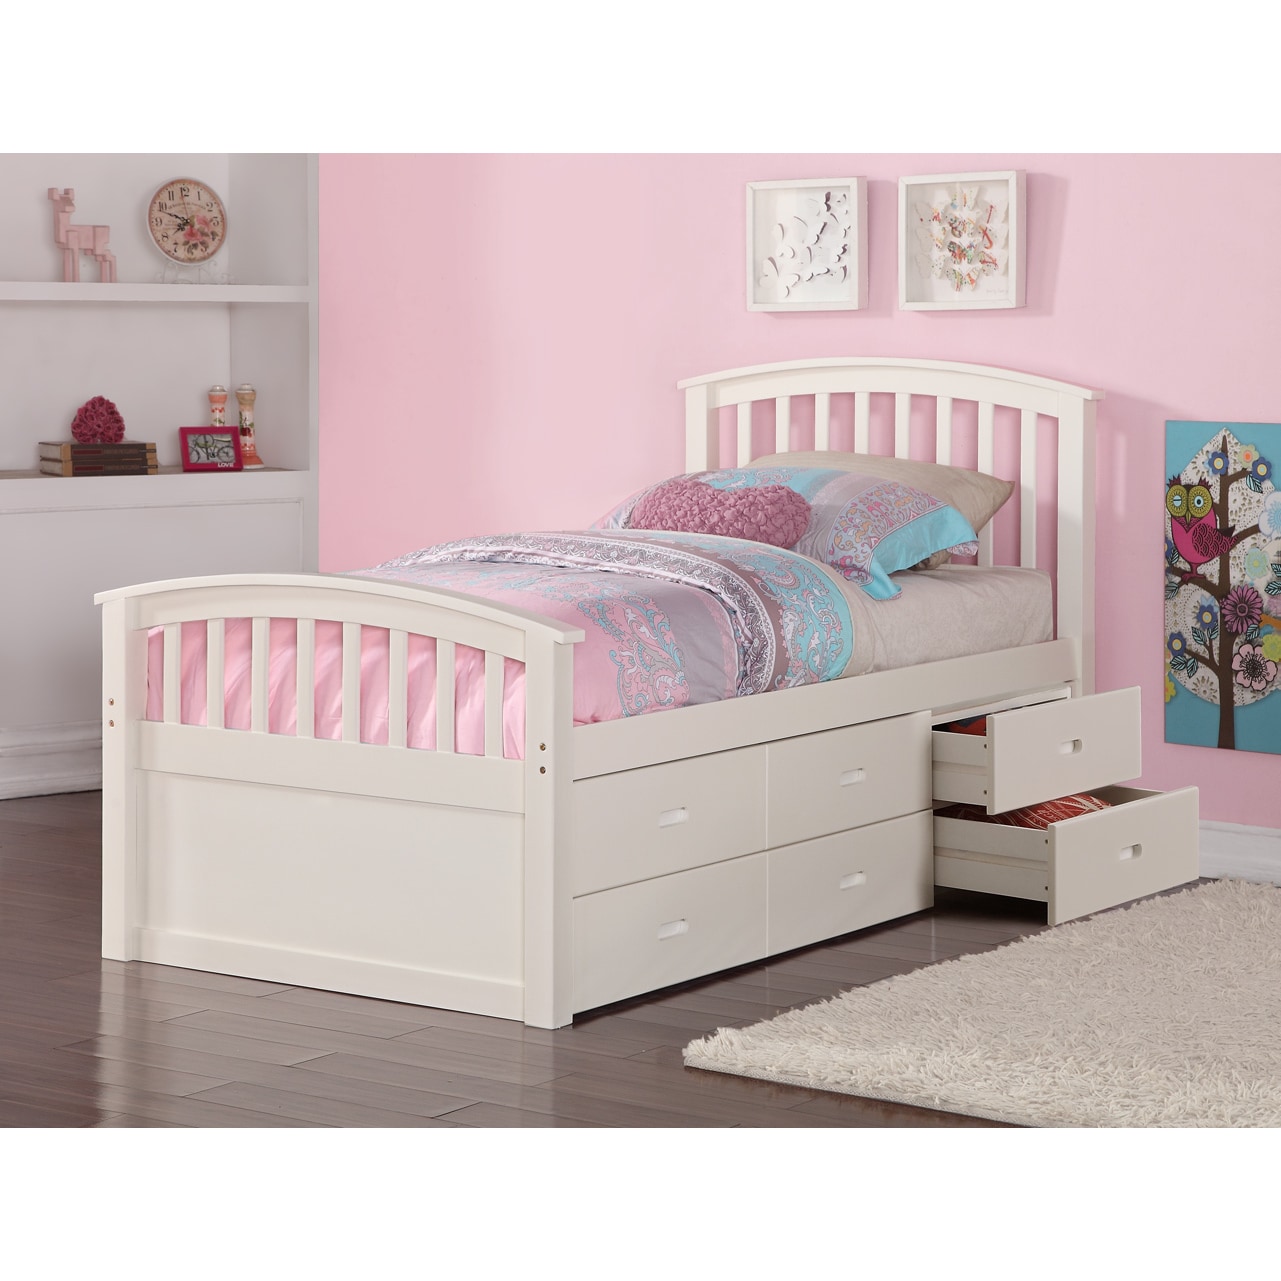 white bed for kids